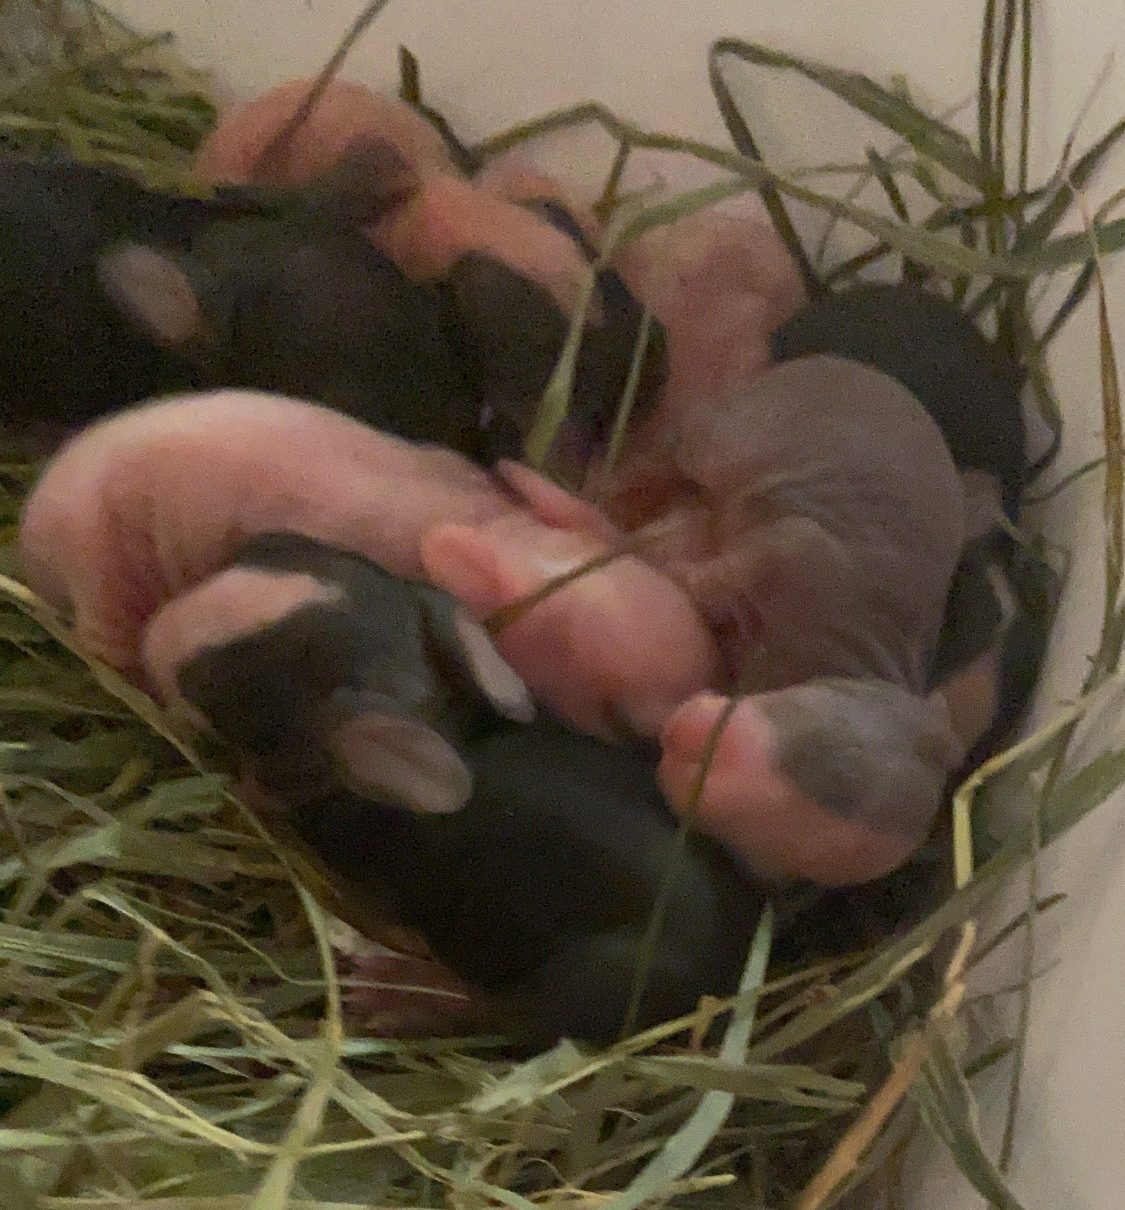 Hairless and pink newborn bunnies in a nest of Timothy hay